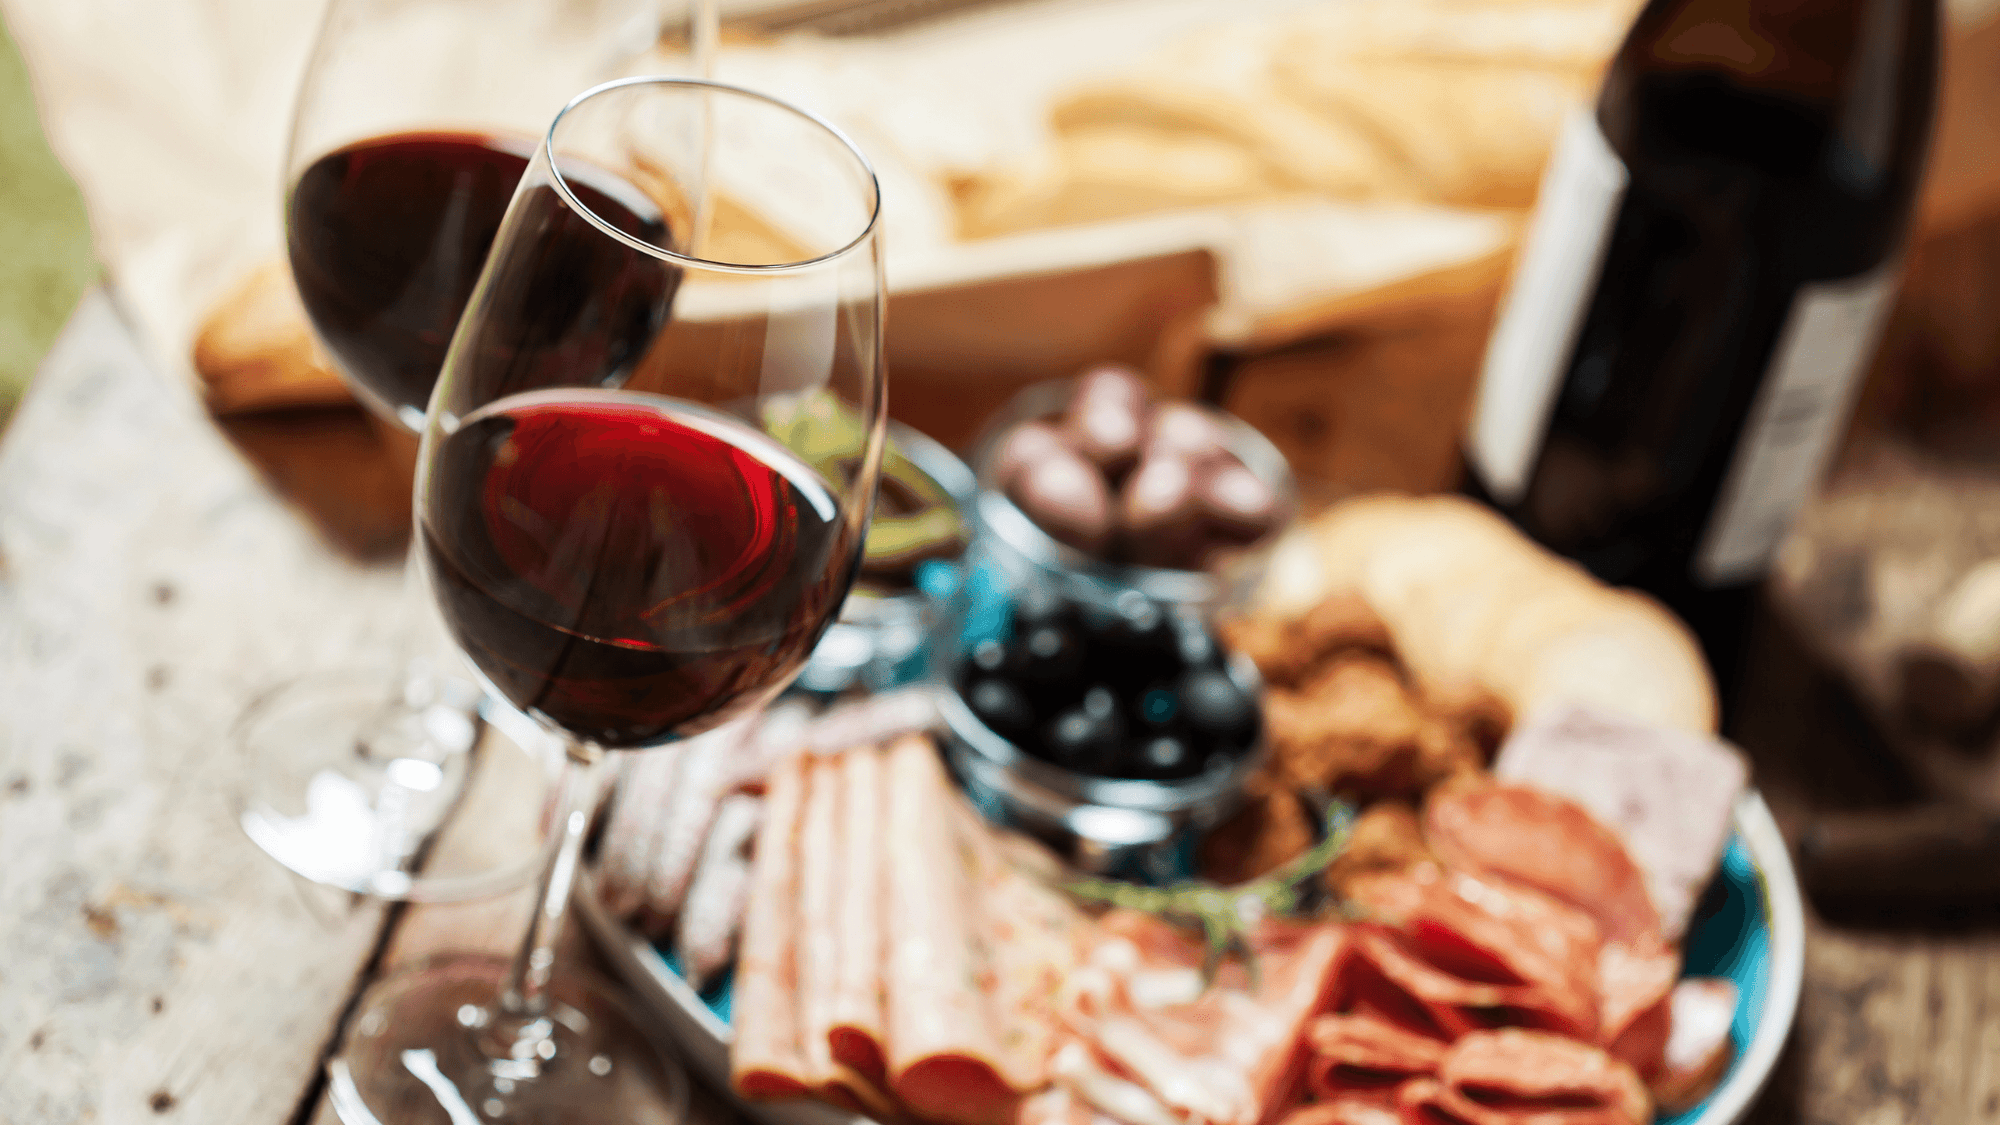 Learn These Helpful Wine and Food Pairing Tips Before Your Next Dinner Party | Wine Stash